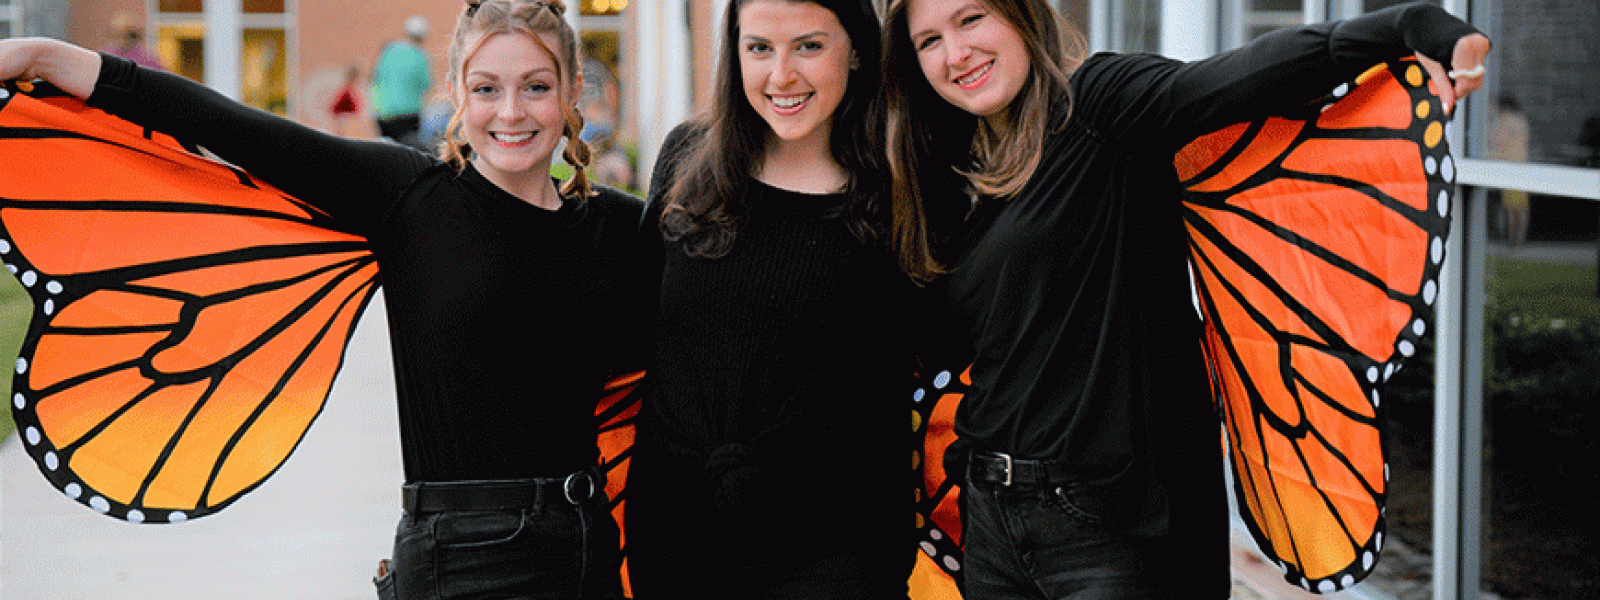 Bridgette Hollowell, Catie McGovern and Eliza Butler form a butterfly.